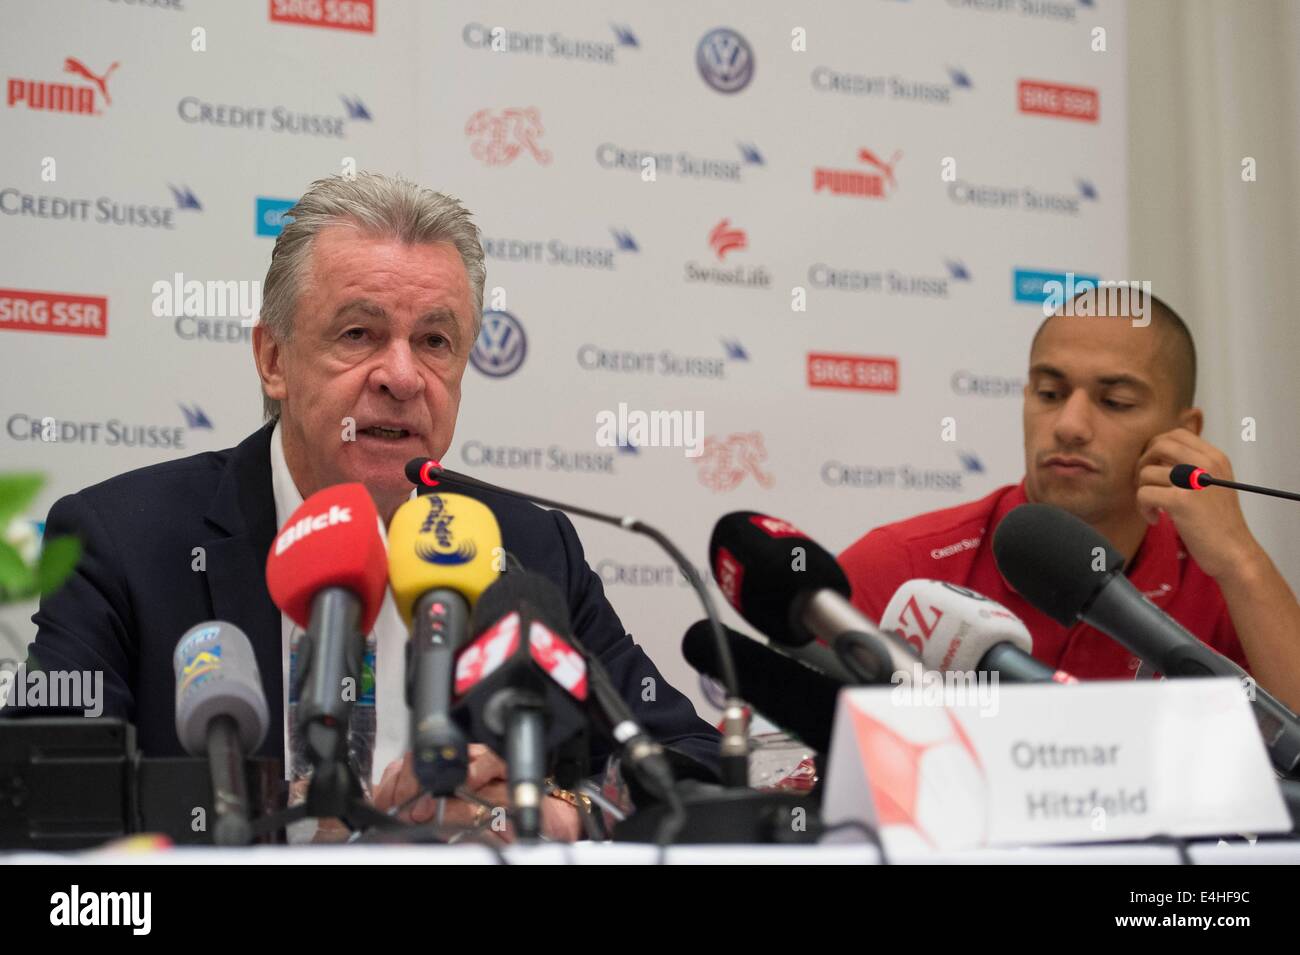 Sao Paulo, Brazil. 02nd July, 2014. Switzerland Coach and Manager Ottmar Hitzfeld (SUI) announces his retirement from his management position with the national Swiss team at a press conference. © Action Plus Sports/Alamy Live News Stock Photo